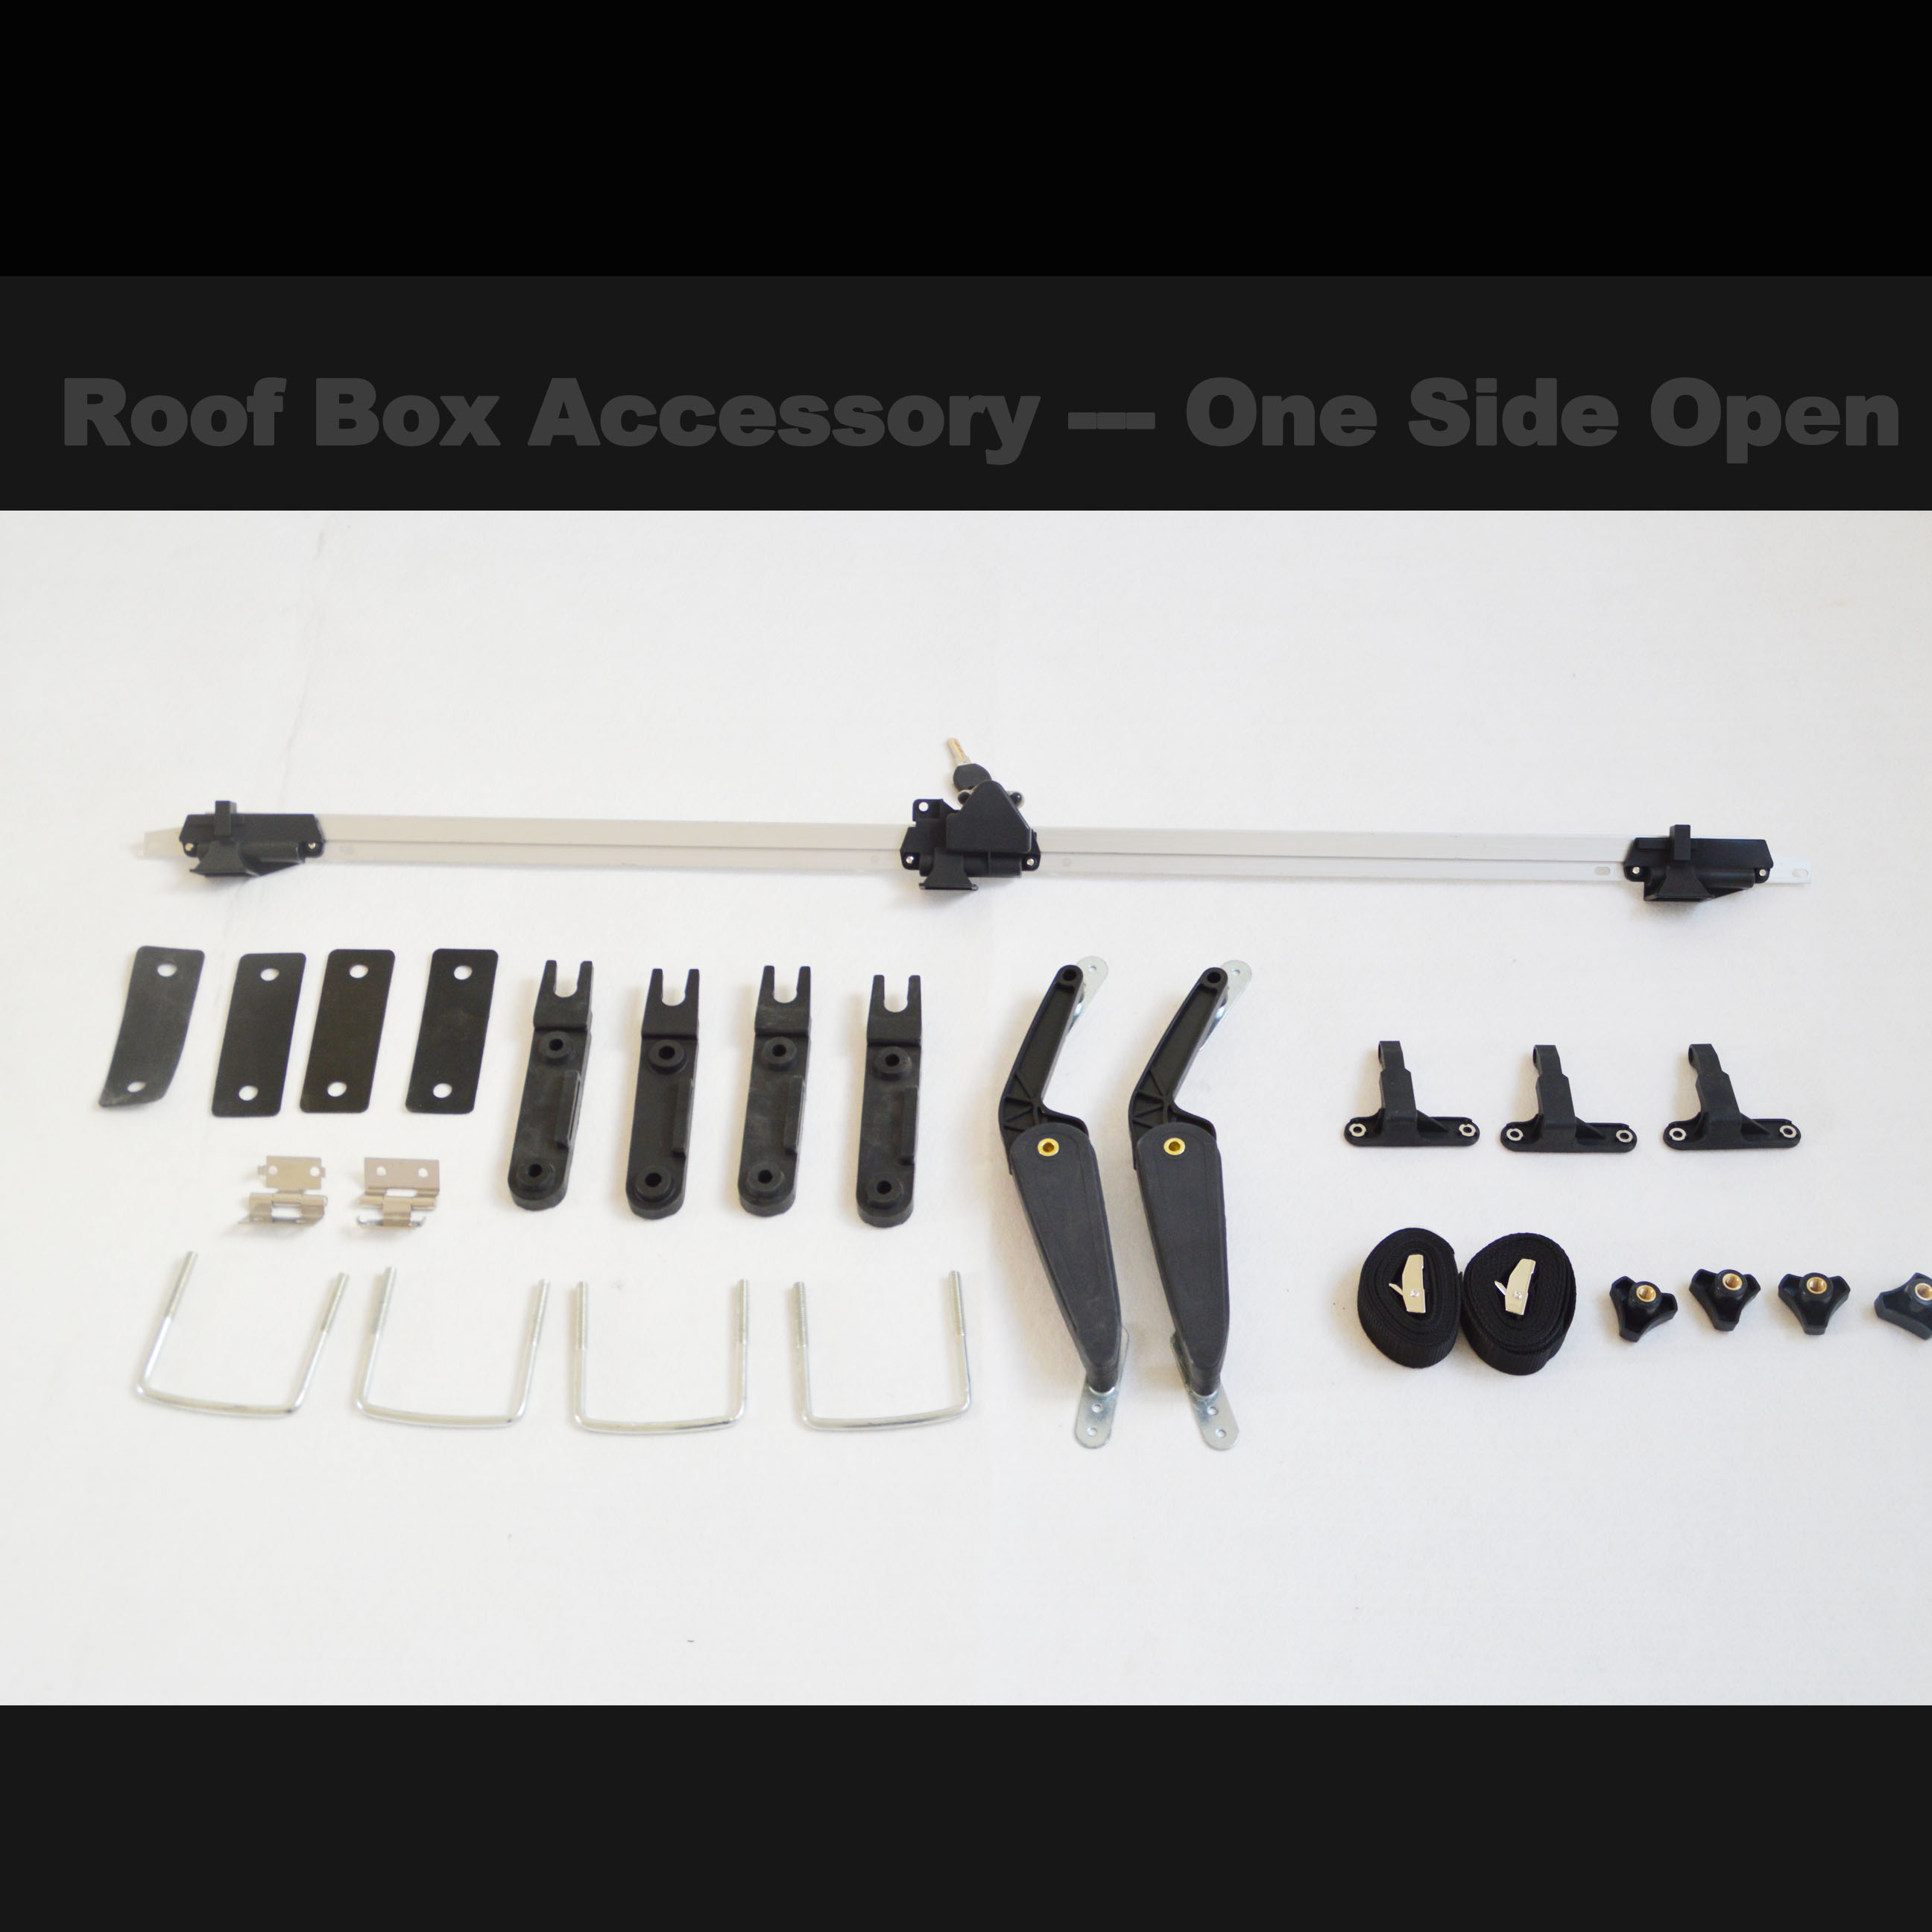 Roof box accessories —one side open